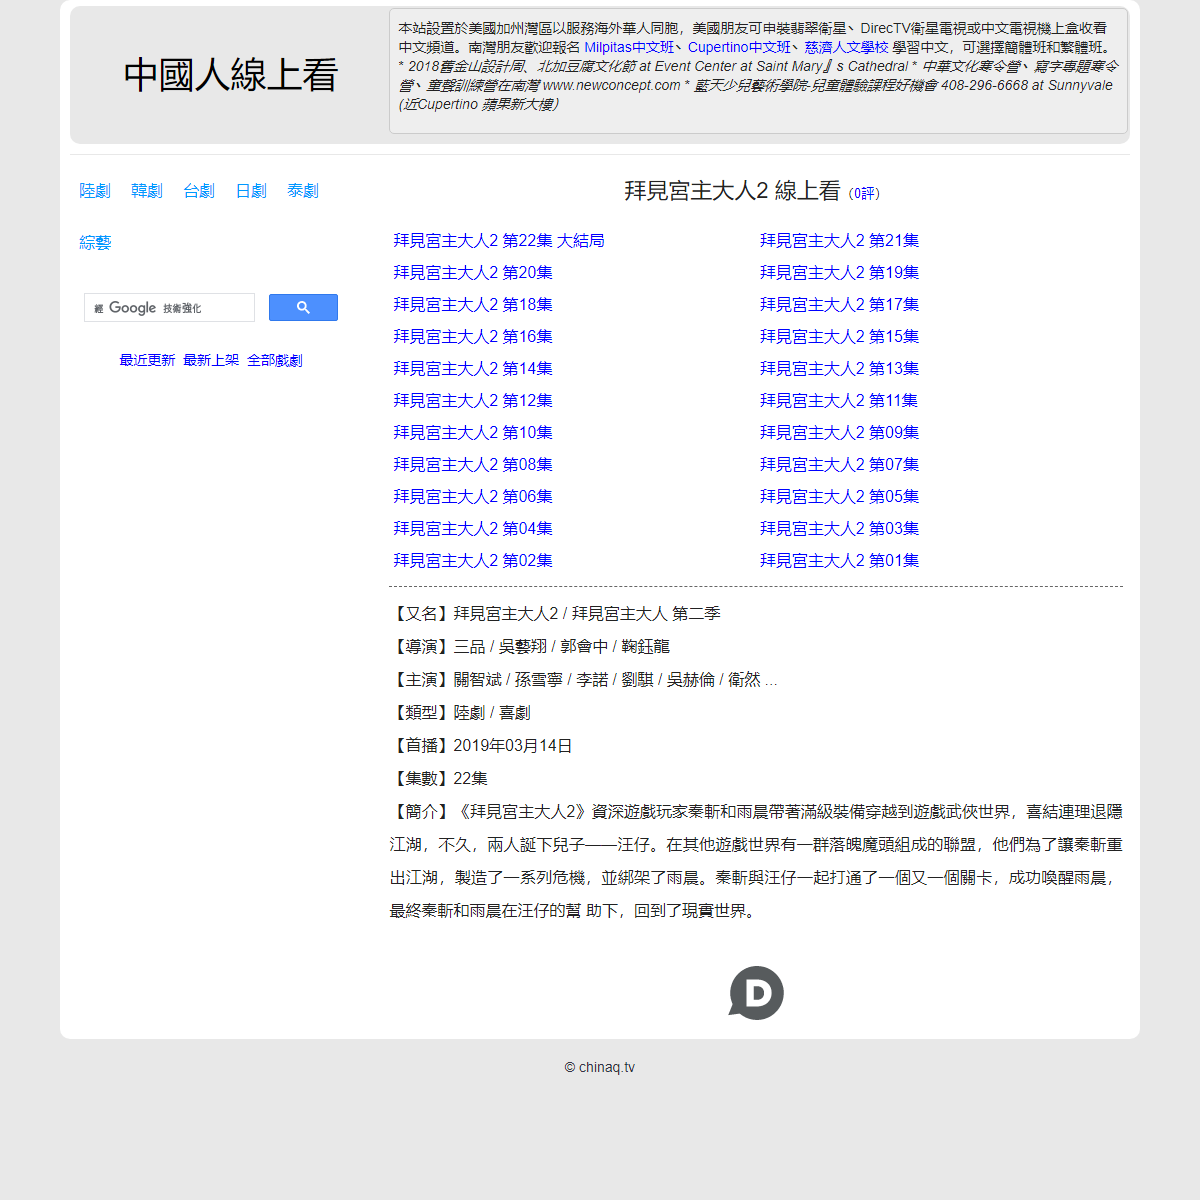 A complete backup of https://chinaq.tv/cn190314d/